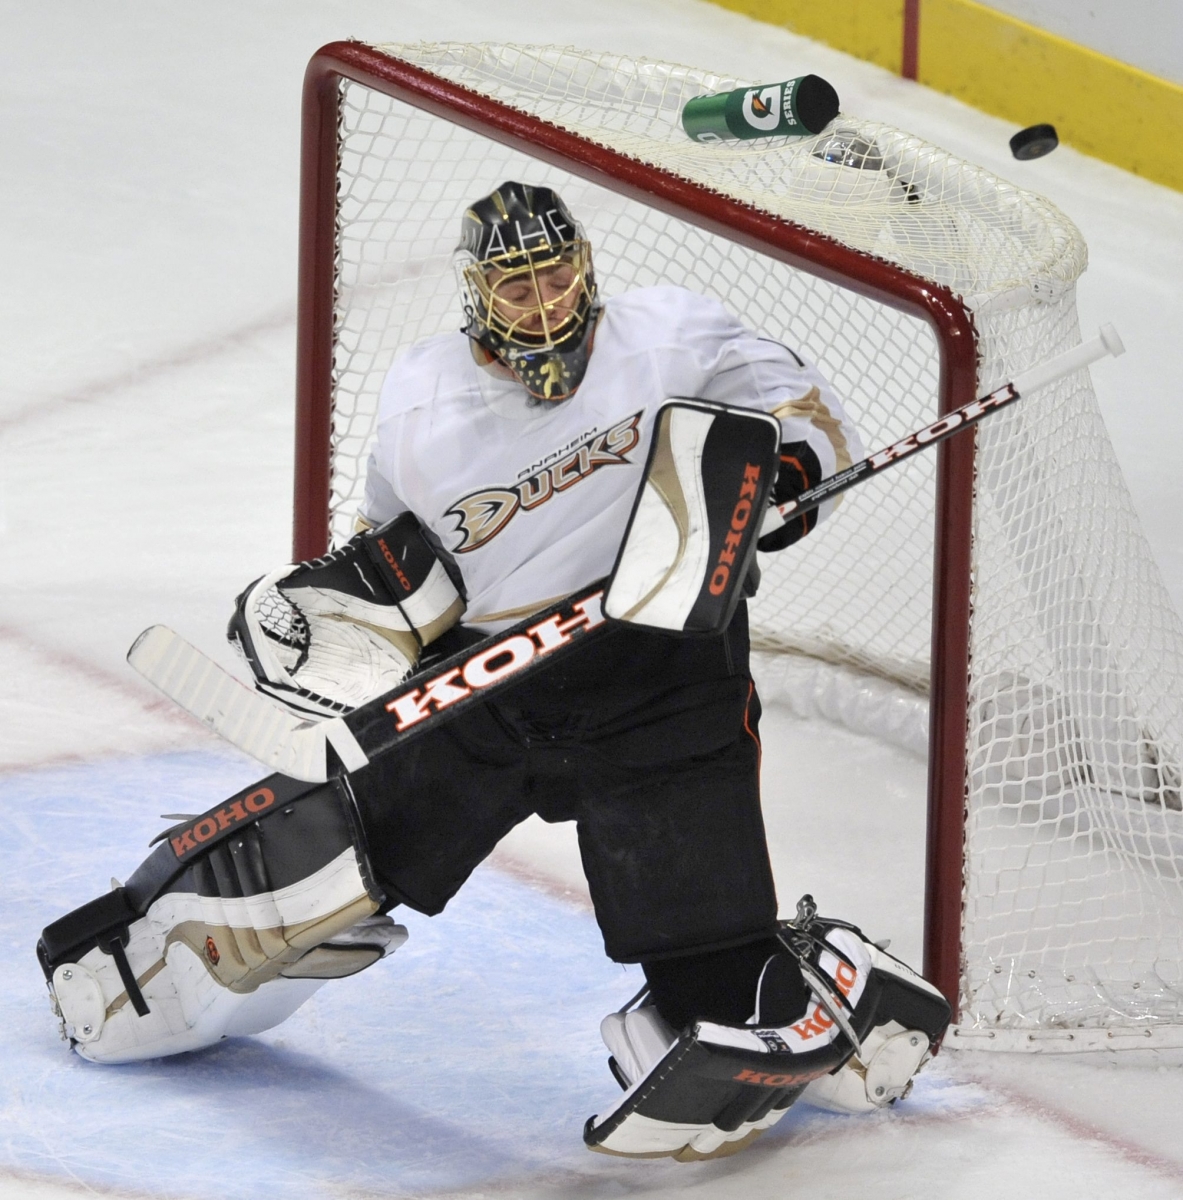 Anaheim Ducks goalie Jonas Hiller, of Switzerland, makes a save against the Chicago Blackhawks during the second period of an NHL hockey game in Chicago, Friday, March, 29, 2013. Anaheim won 2-1. (AP Photo/Paul Beaty)